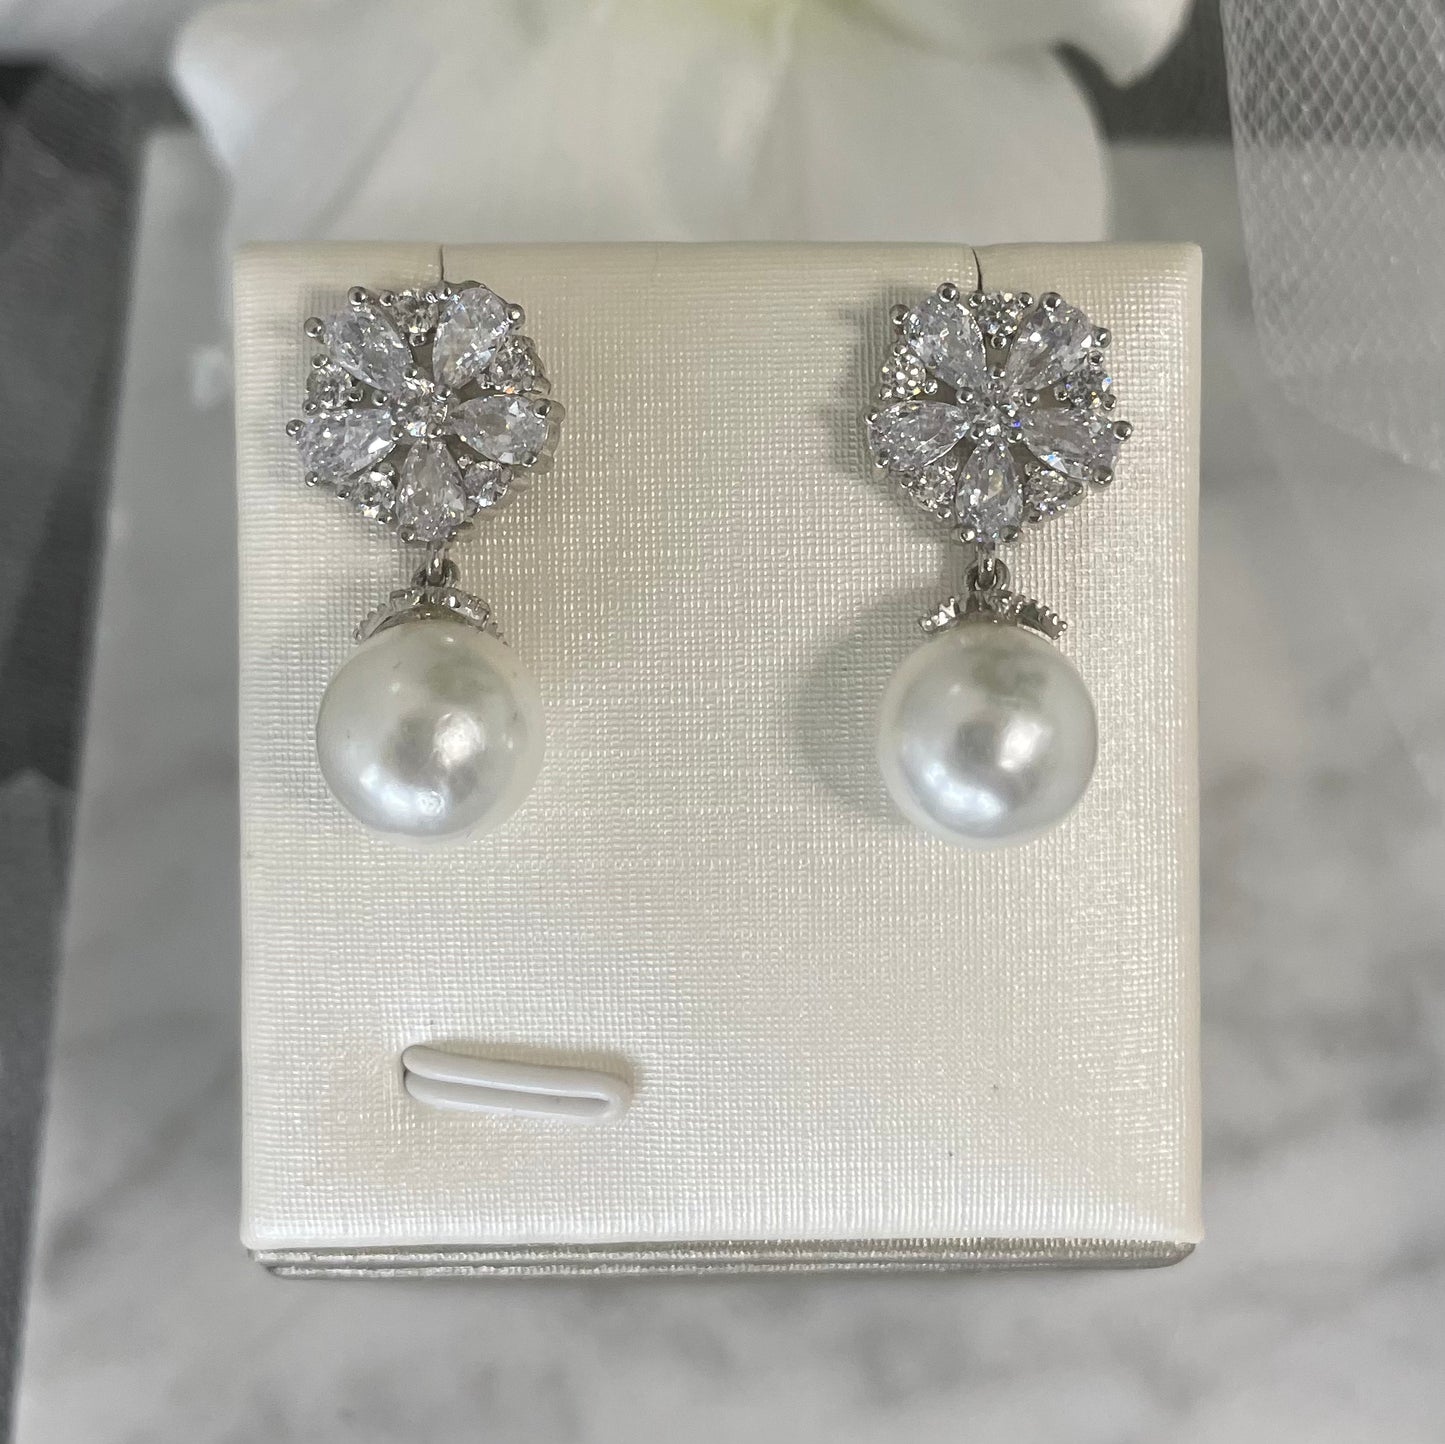 Elsie Bridal Earrings with CZ Flower and Pearl Dangle in Silver Plating - Divine Bridal